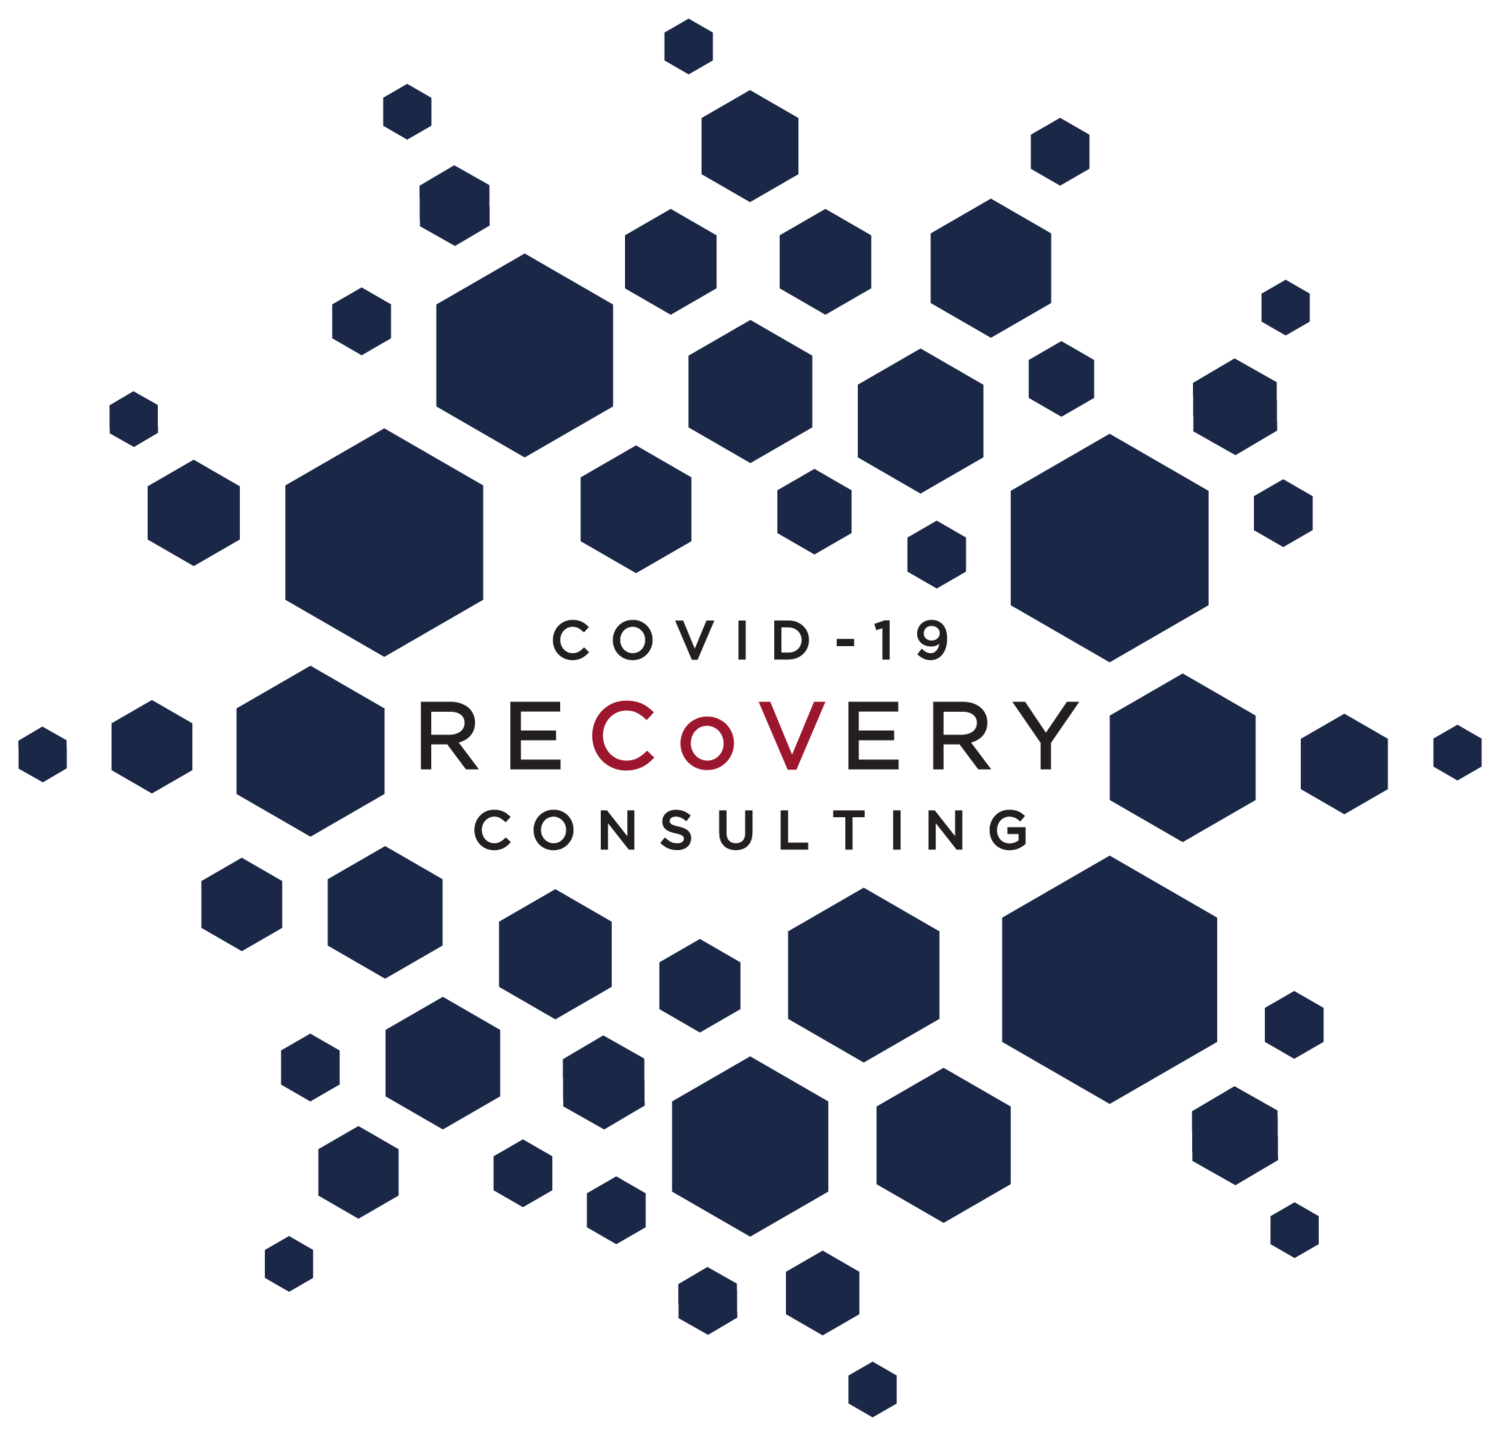 Home Covid 19 Recovery Consulting Covid 19 Recovery Consulting Are you searching for covid 19 png images or vector? www covid19reopen com